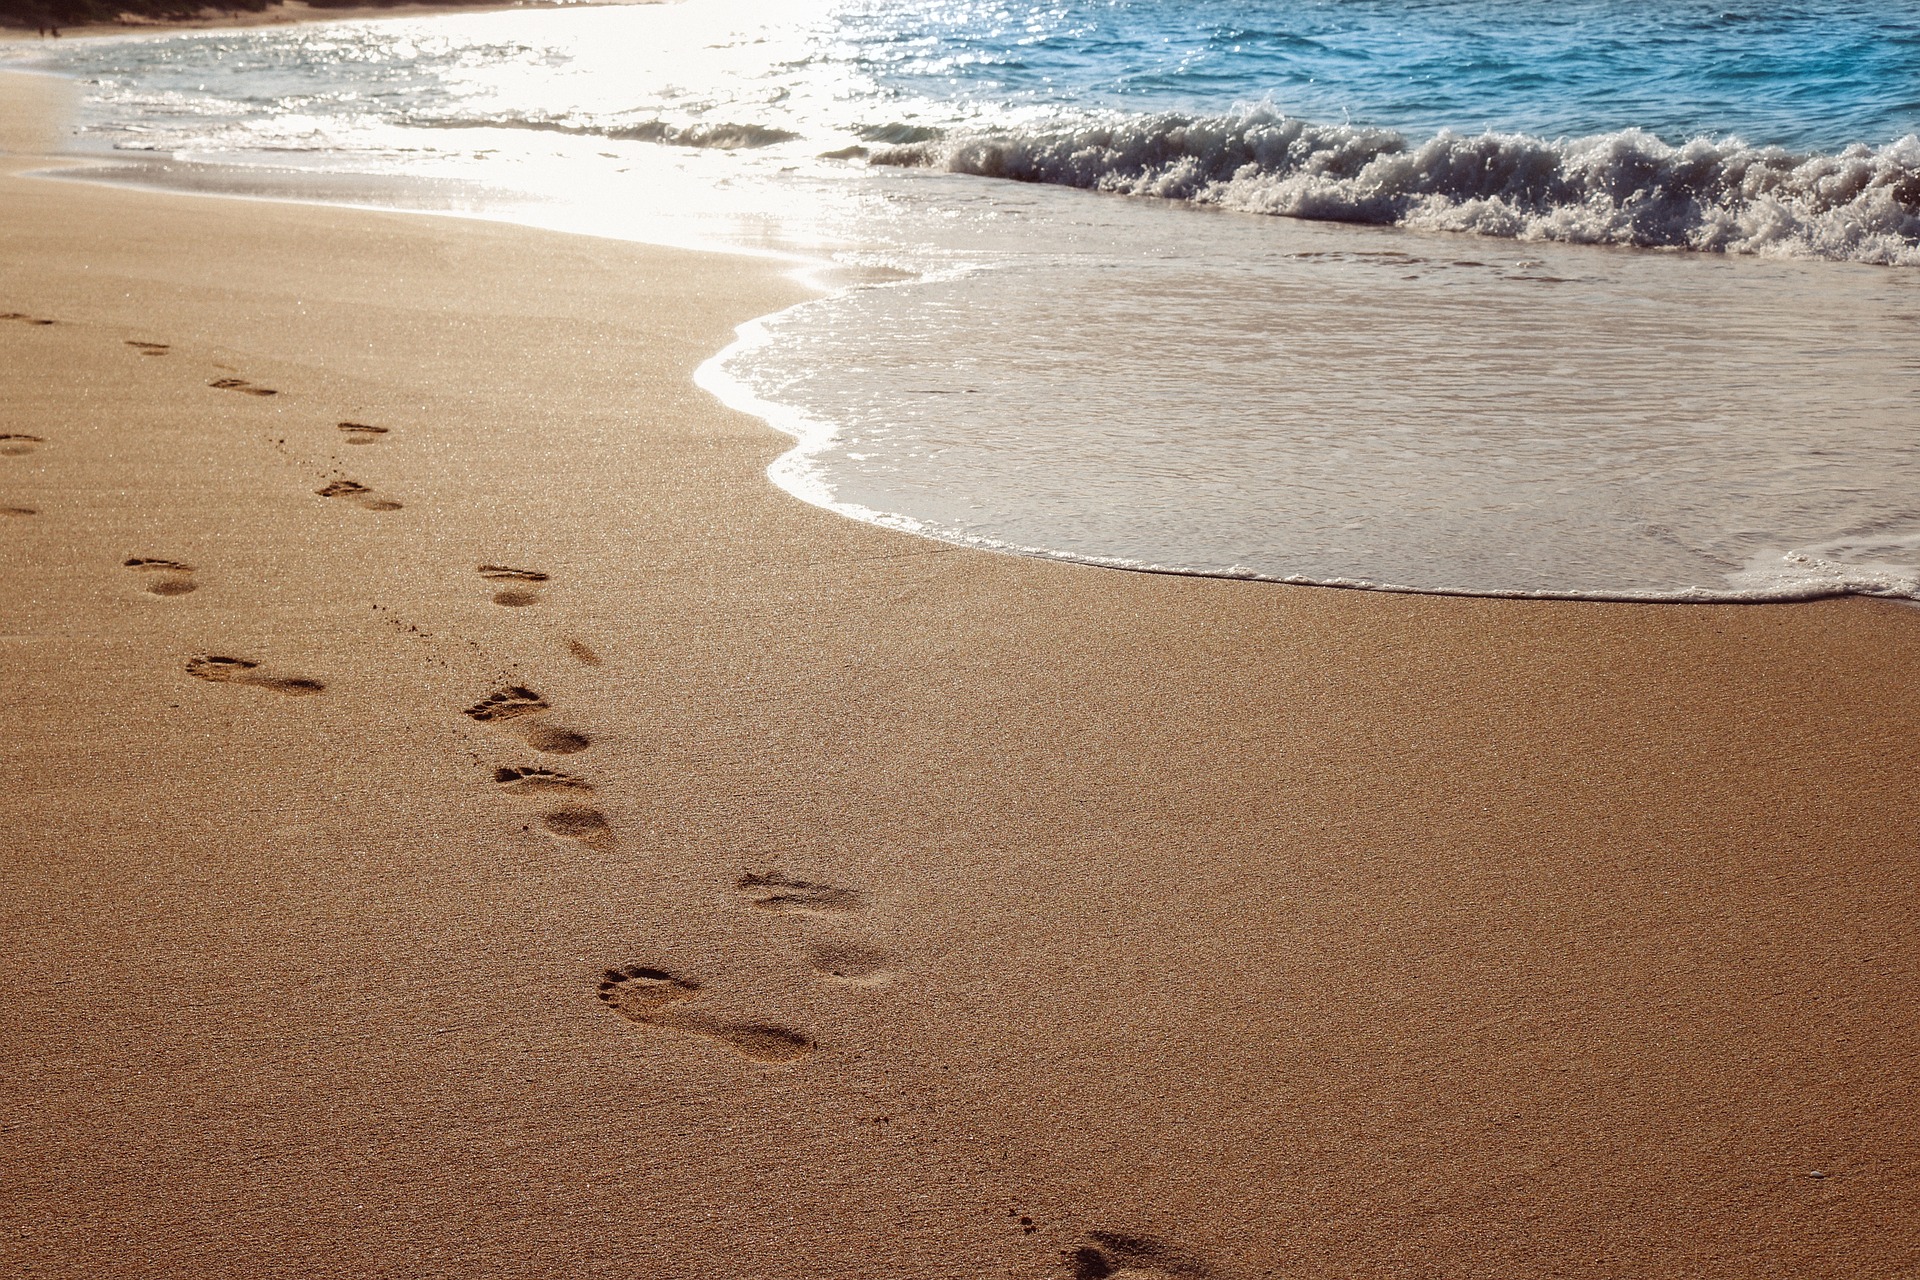 A beach with footprints in the sand